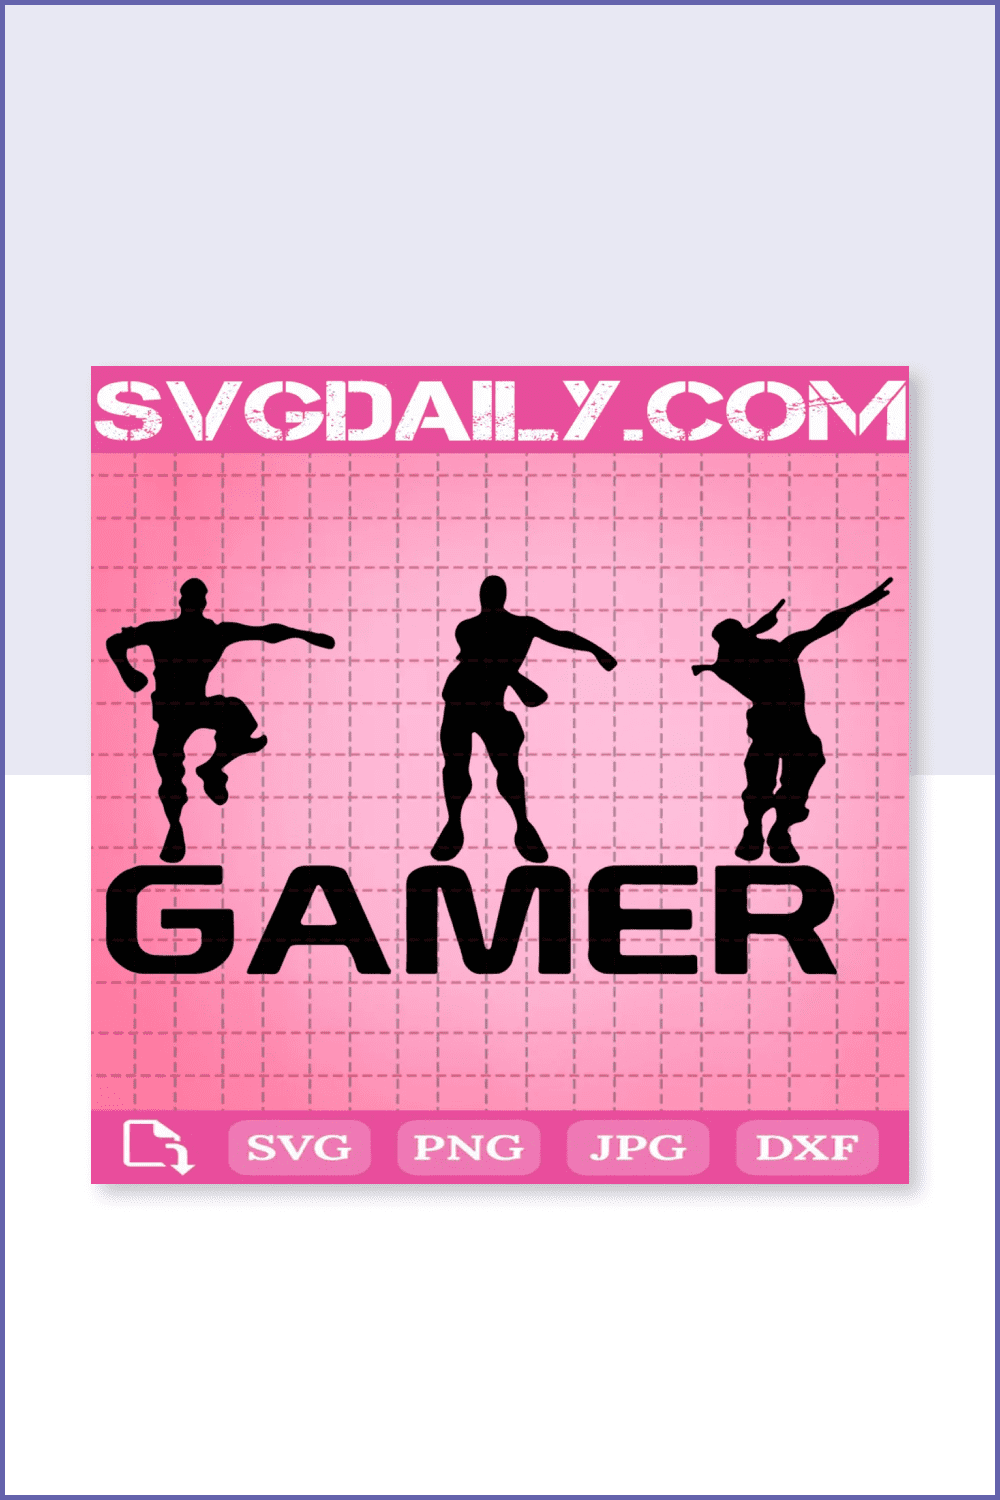 Black silhouettes of gamers in different poses on a pink background